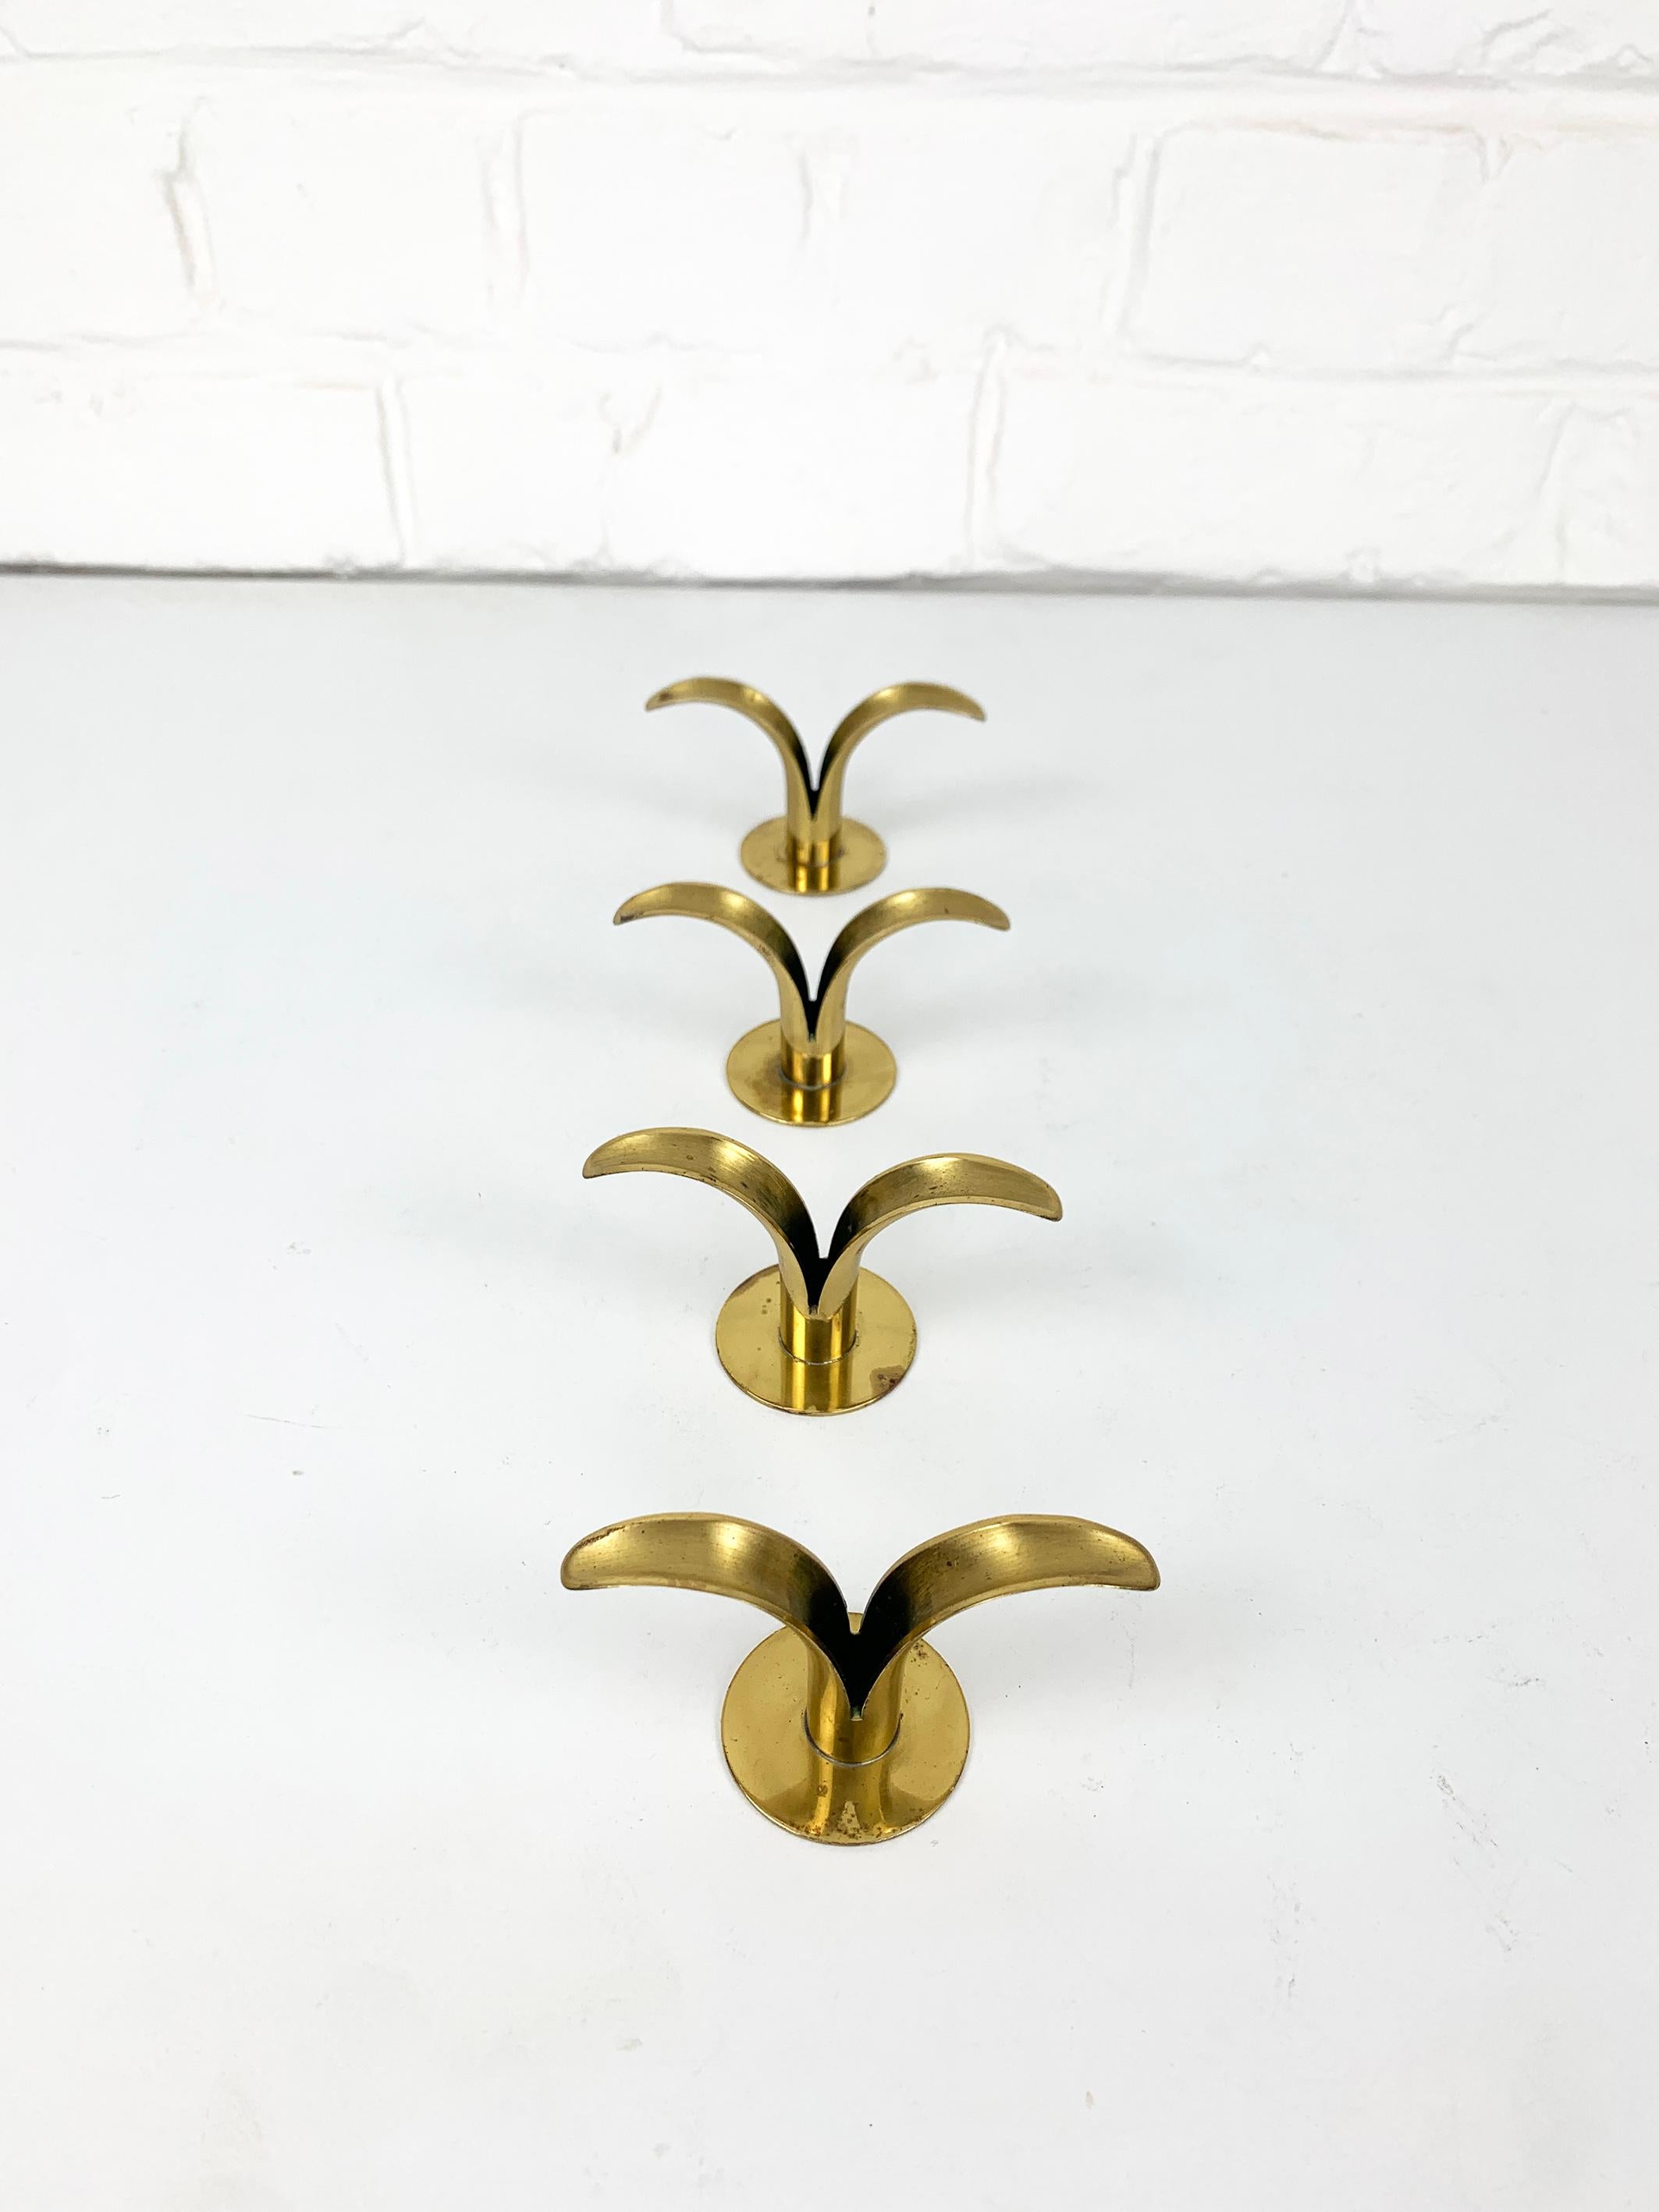 20th Century 4 Small Mid-Century Brass Model Lily Candleholders from Lbe Konst, Ystad, Sweden For Sale